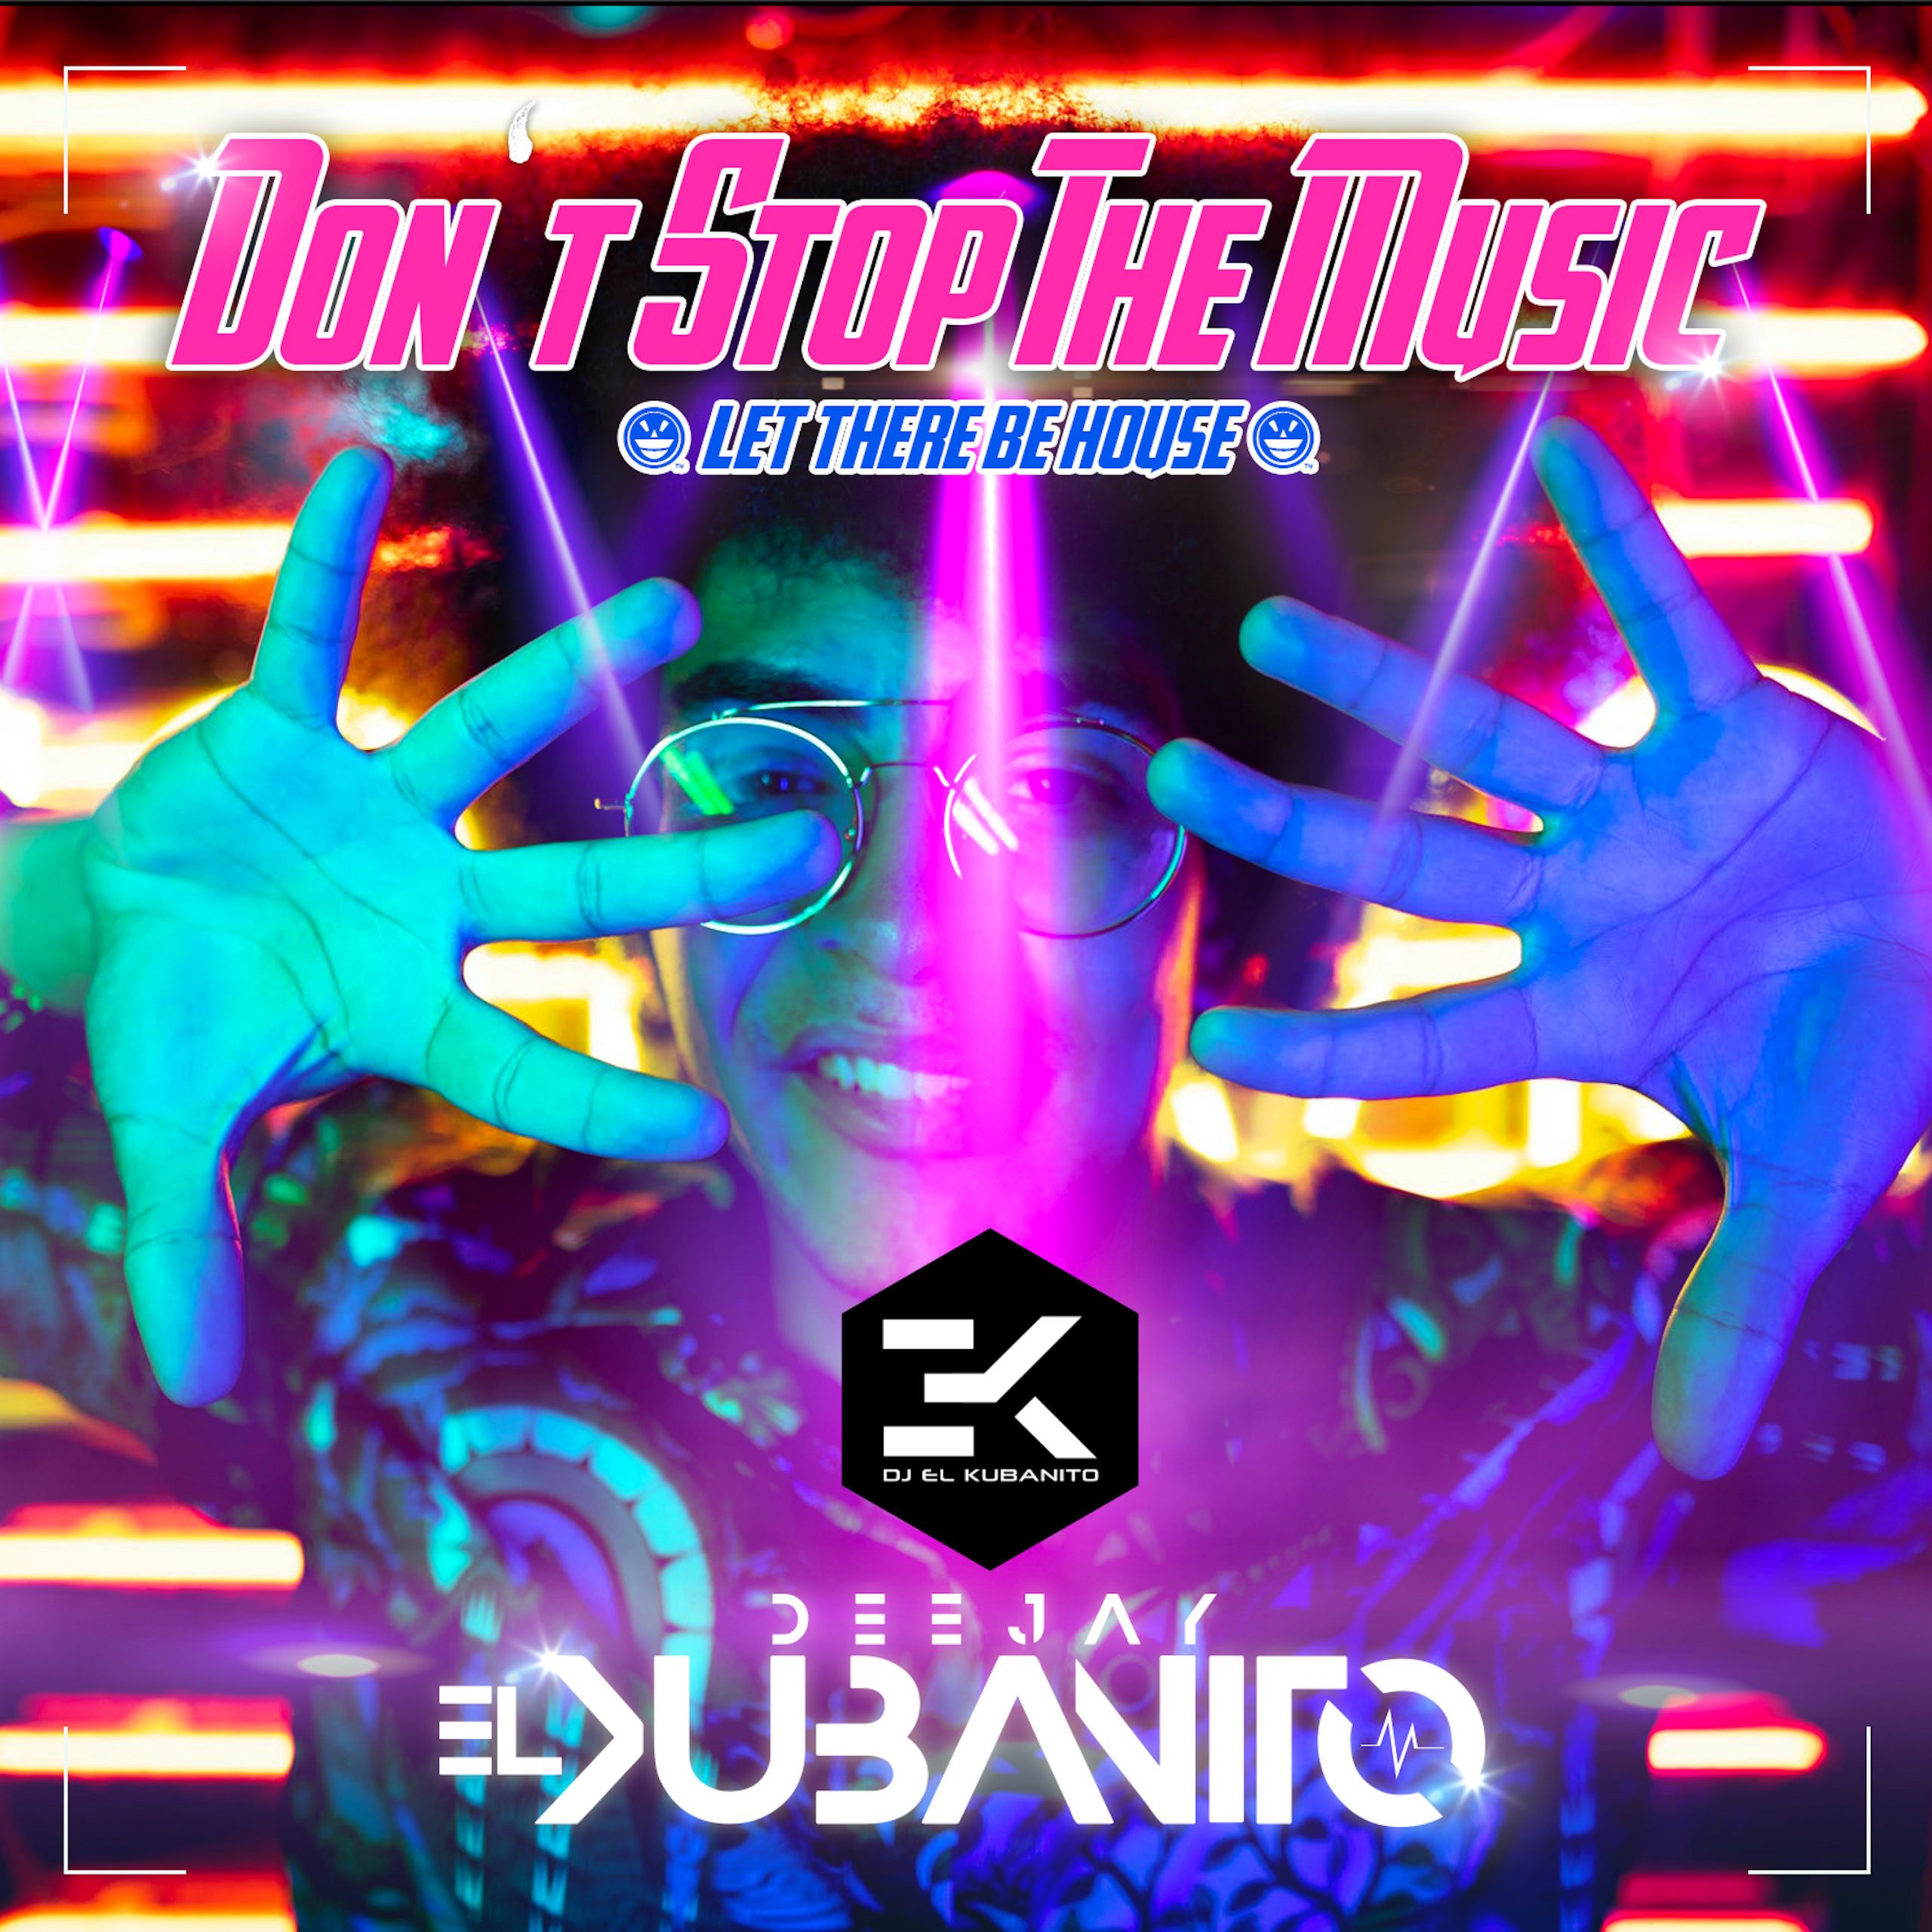 “Don’t Stop The Music (Let There Be House)”, è il nuovo singolo di Deejay El Kubanito